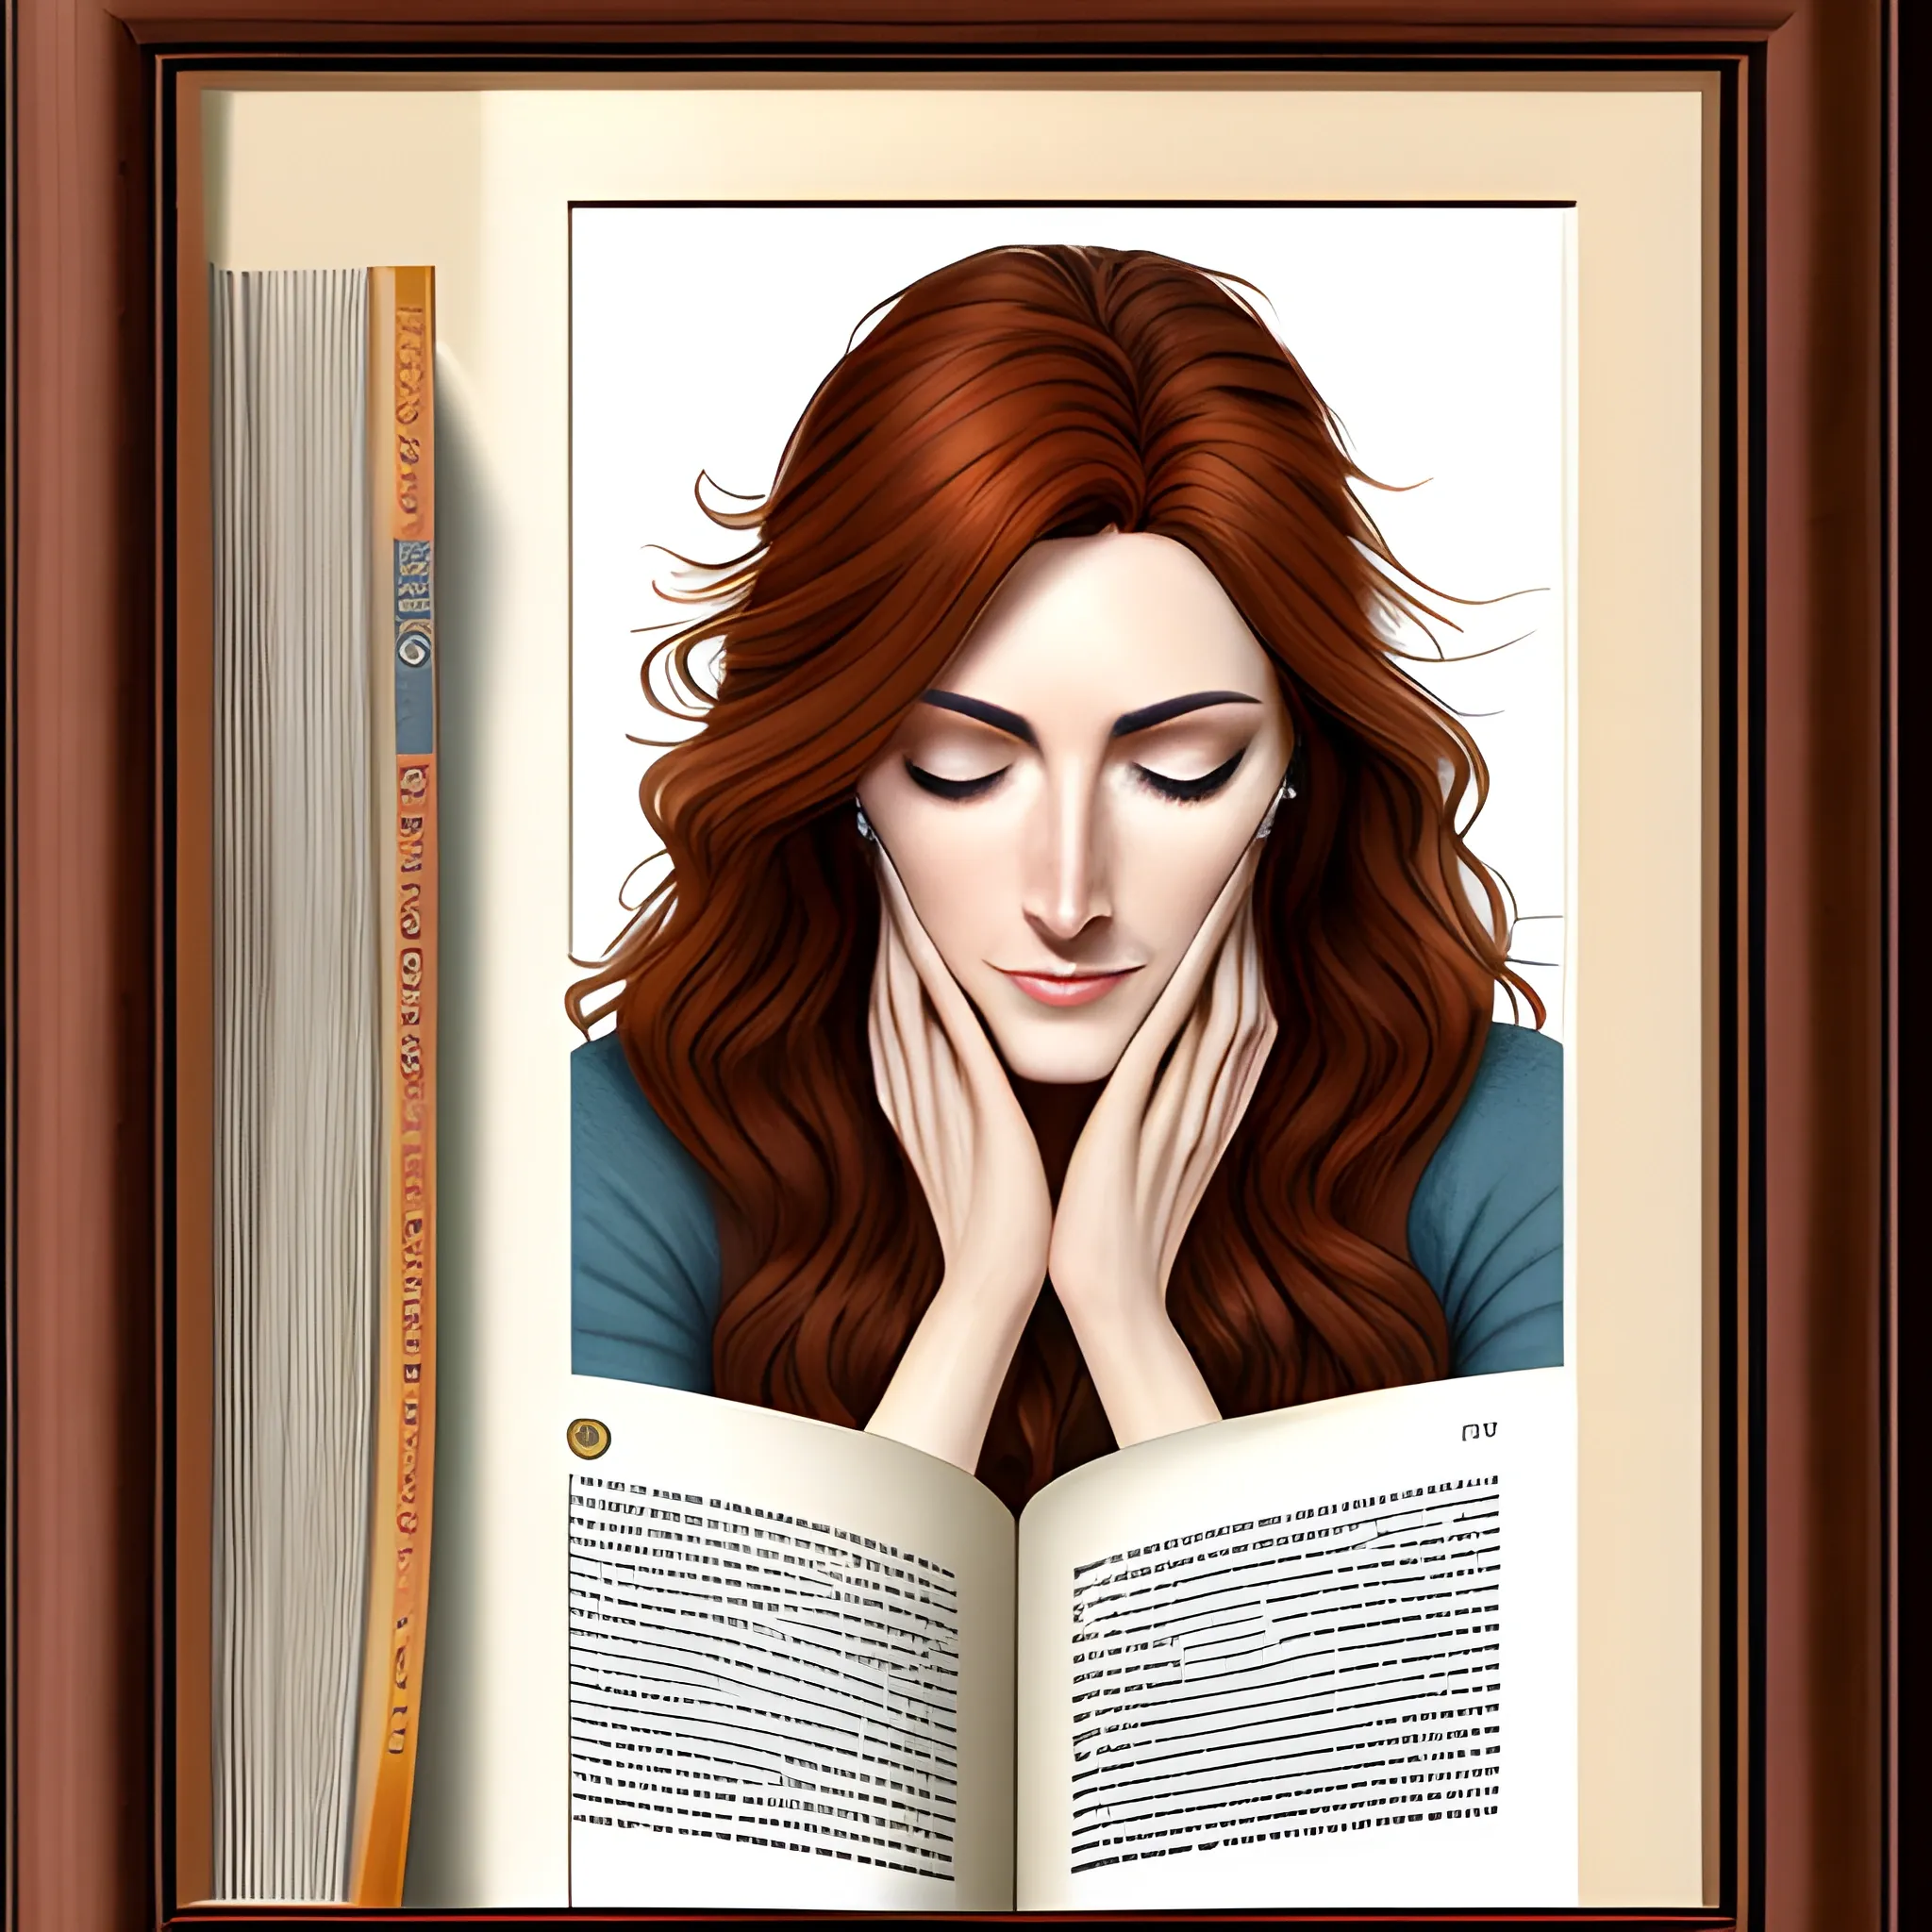 Frame a young woman in profile against a bookshelf, strands of auburn hair concealing part of her face as her hazel eyes focus intently on the pages of an open book, drawn deep into the story.